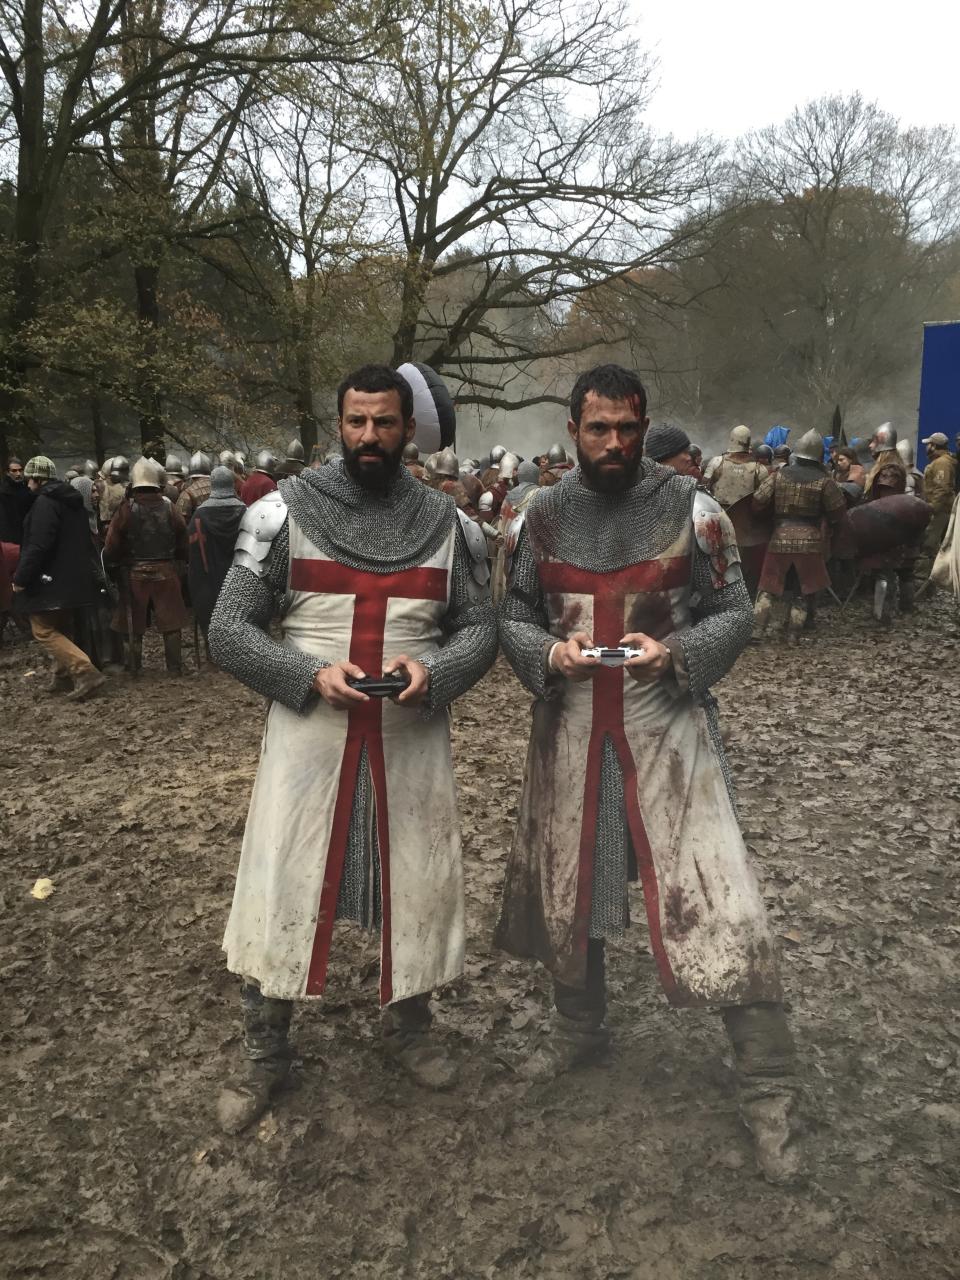 <p>Me and my @knightfallshow stunt double and friend, Faycal. I did all my own fighting and most of my stunts but despite that Faycal was on set with me every day. Teaching me, improving me and encouraging me. When this photograph was taken I was in the middle of working 21 days consecutively. There were times when my energy was totally gone but he would pick me up and cheer me up. What a guy. Thank you bro! — @tom_cullen #Knightfall #HISTORY<br><br>(Photo: Instagram) </p>